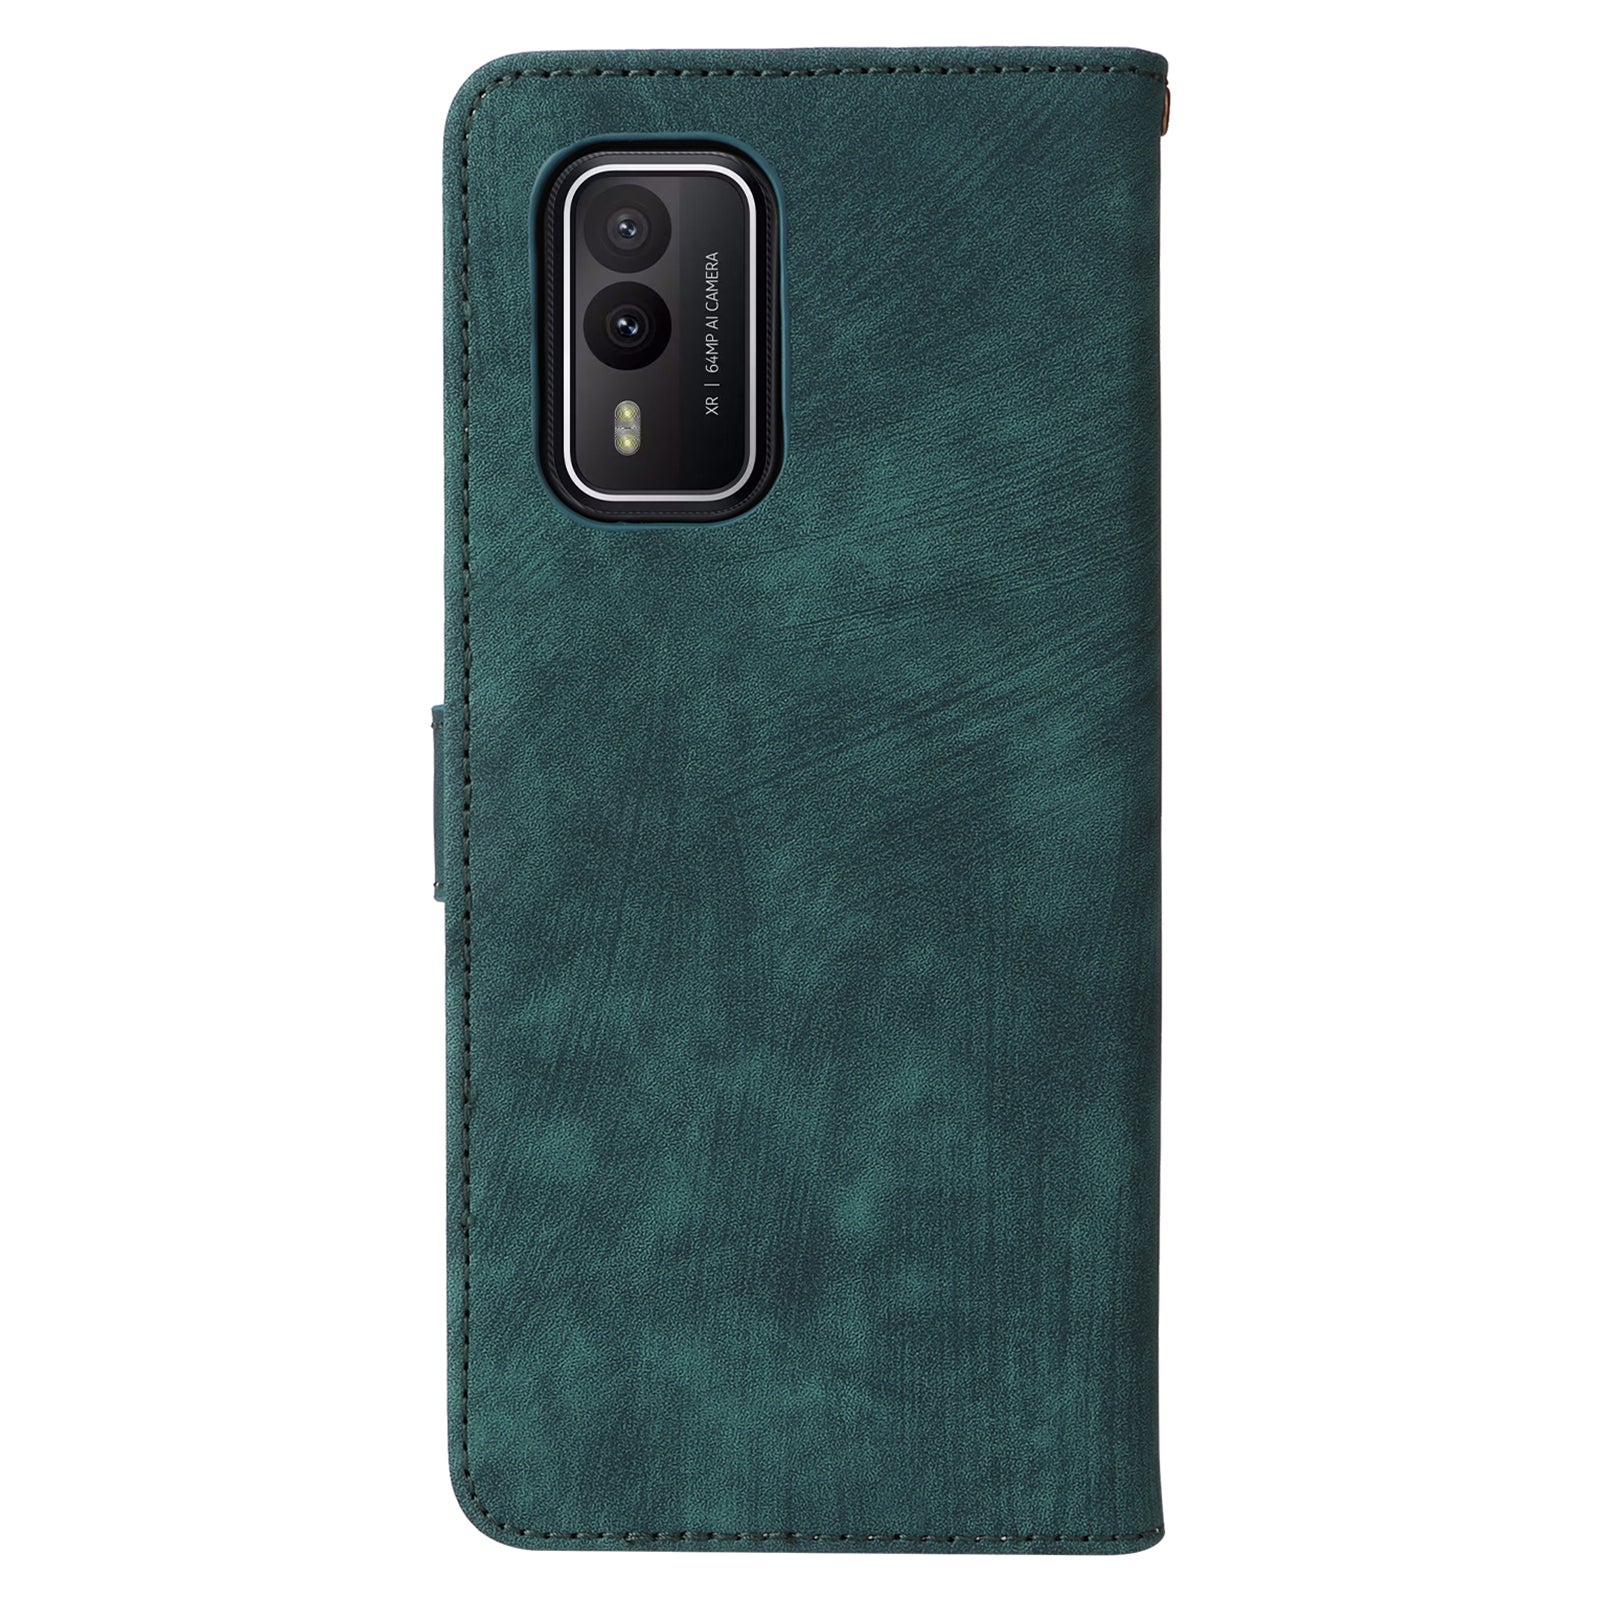 Uniqkart for Nokia XR21 RFID Blocking Phone Cover Wallet Stand Shell Shockproof Leather Case - Green